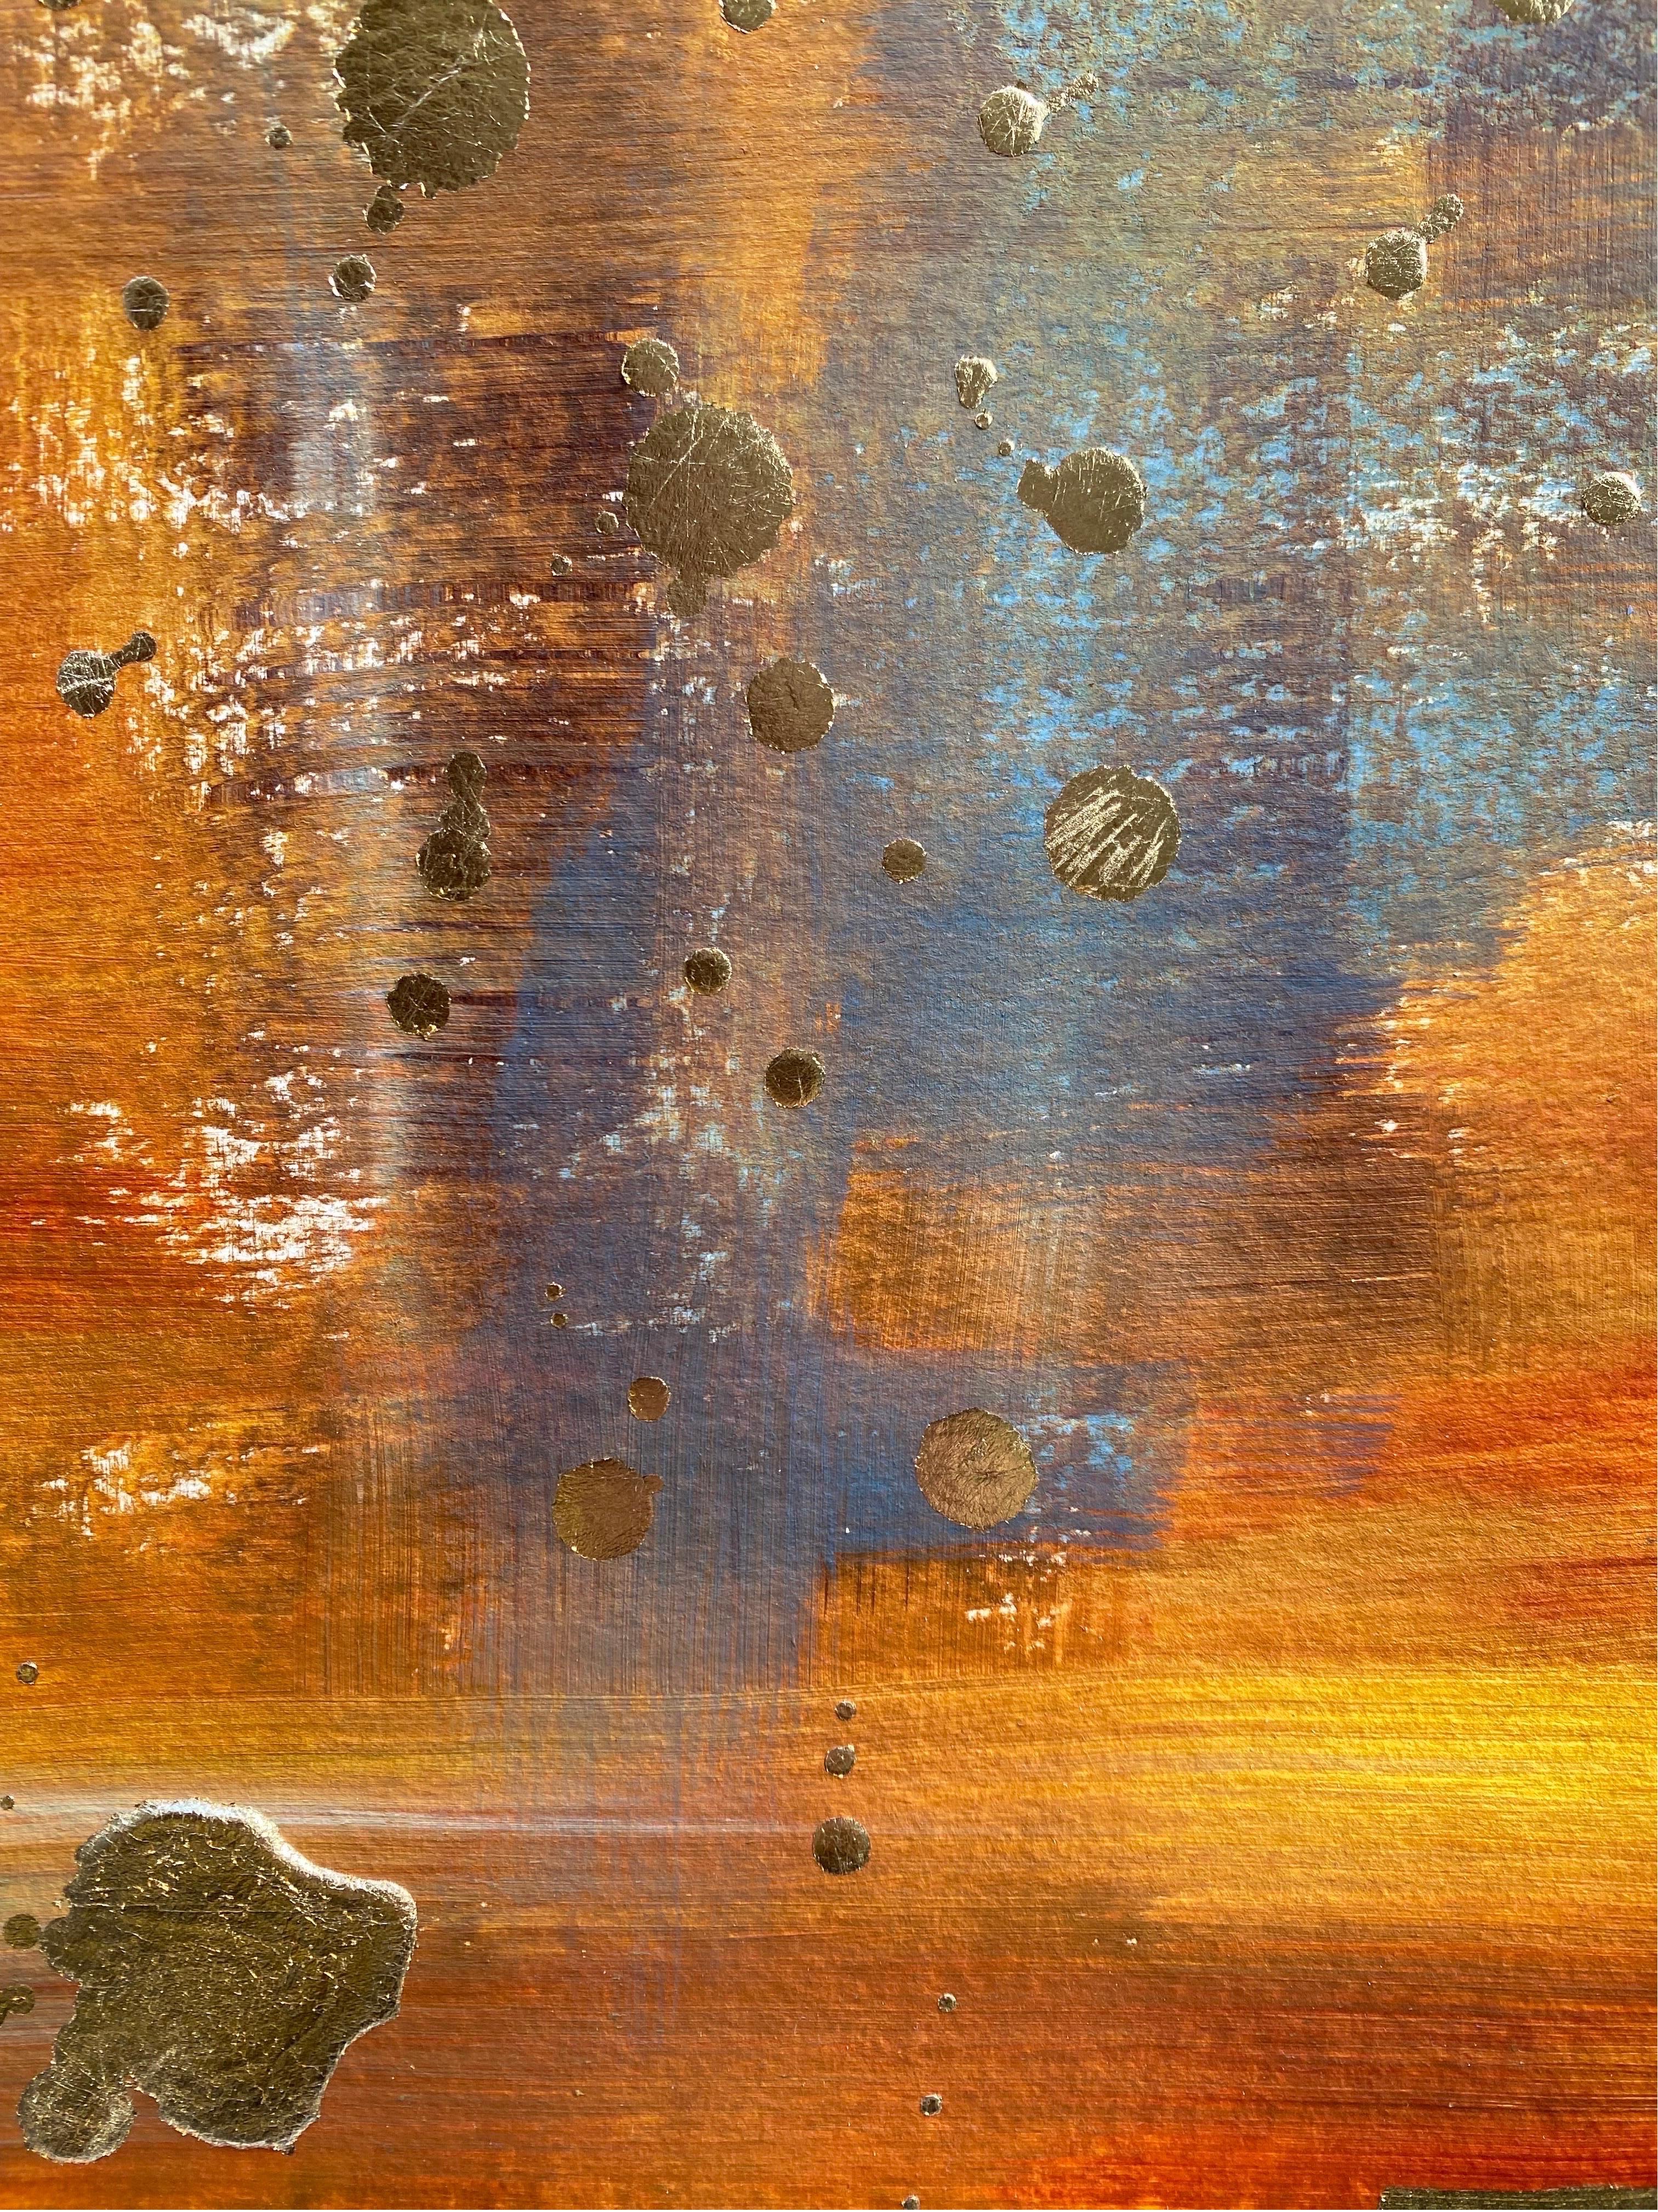 Original-Across the Universe-abstract-gold leaf-UK Awarded Artist-Work on paper 3